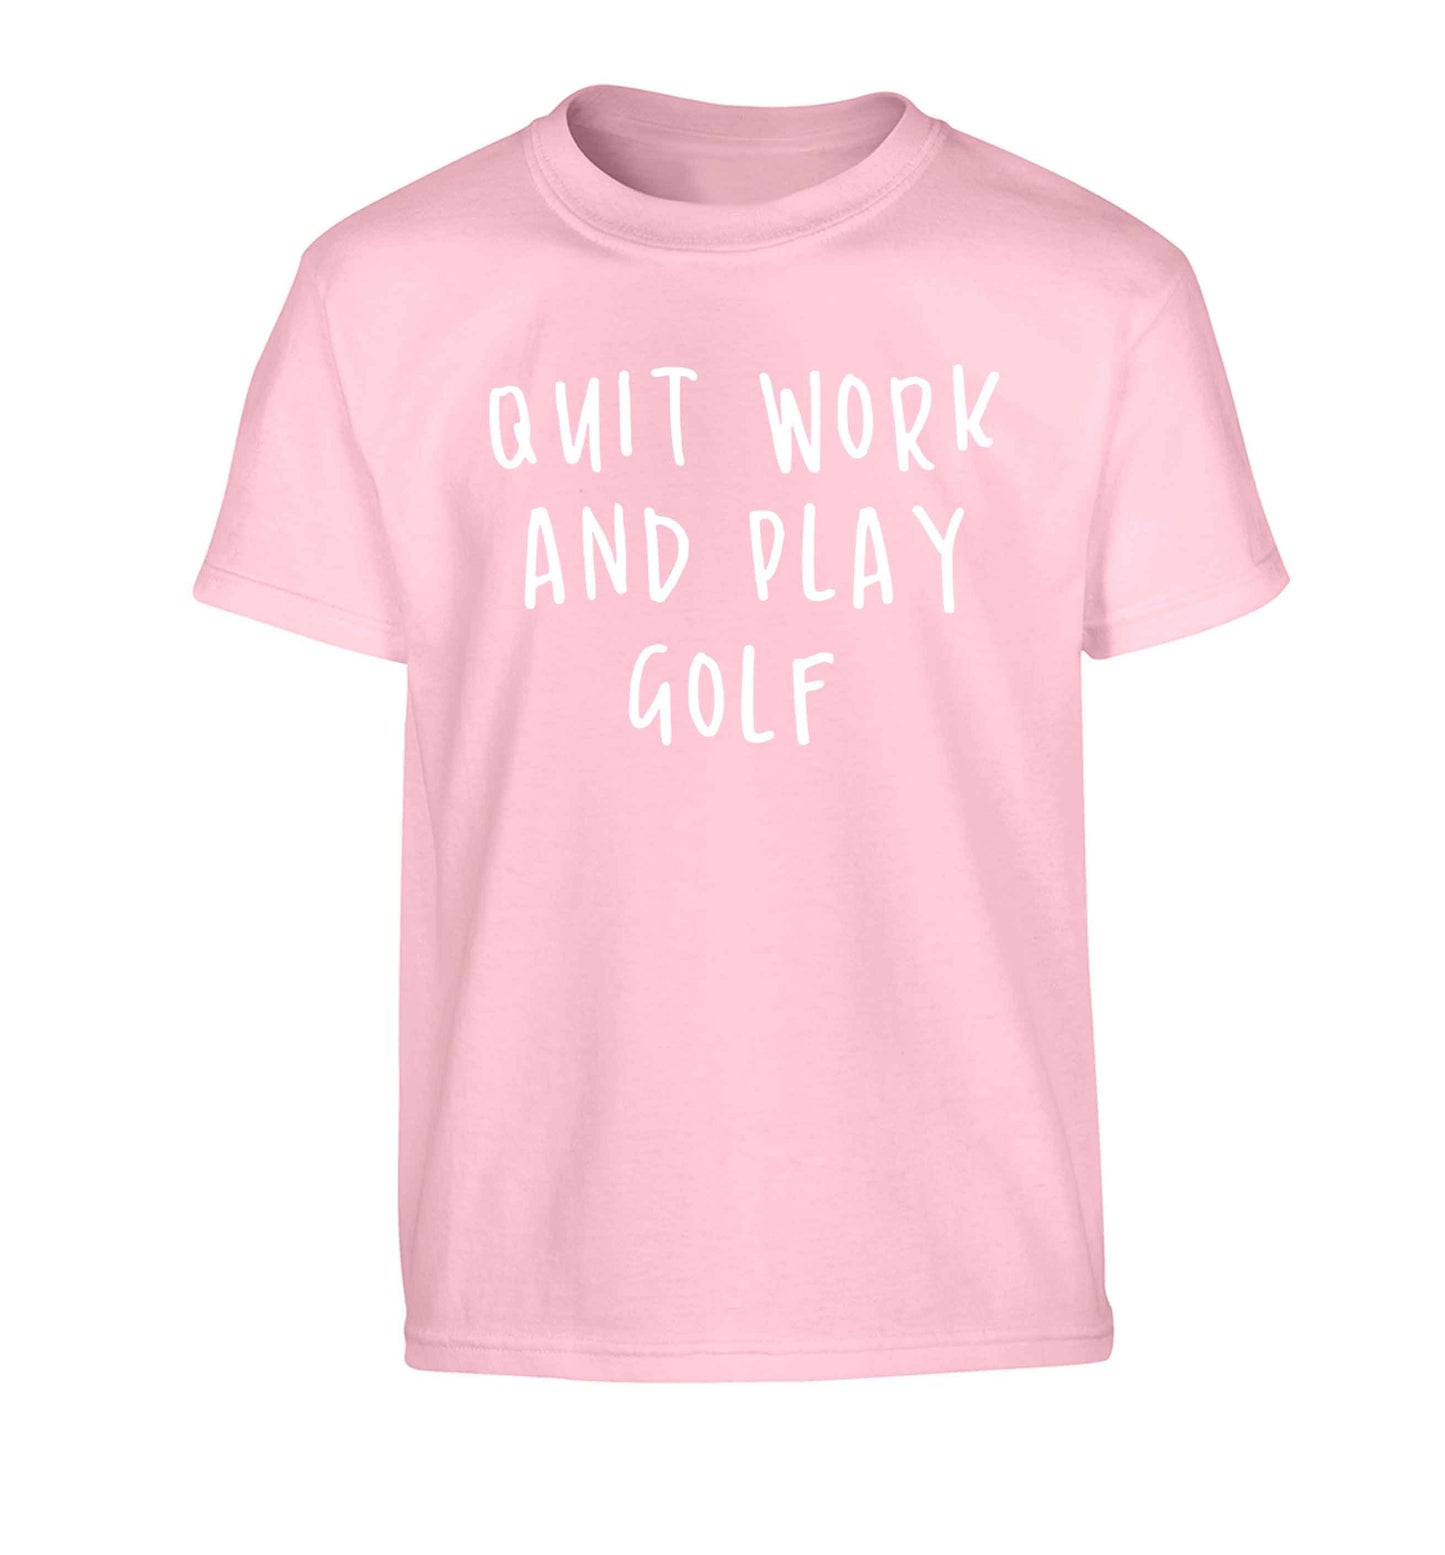 Quit work and play golf Children's light pink Tshirt 12-13 Years